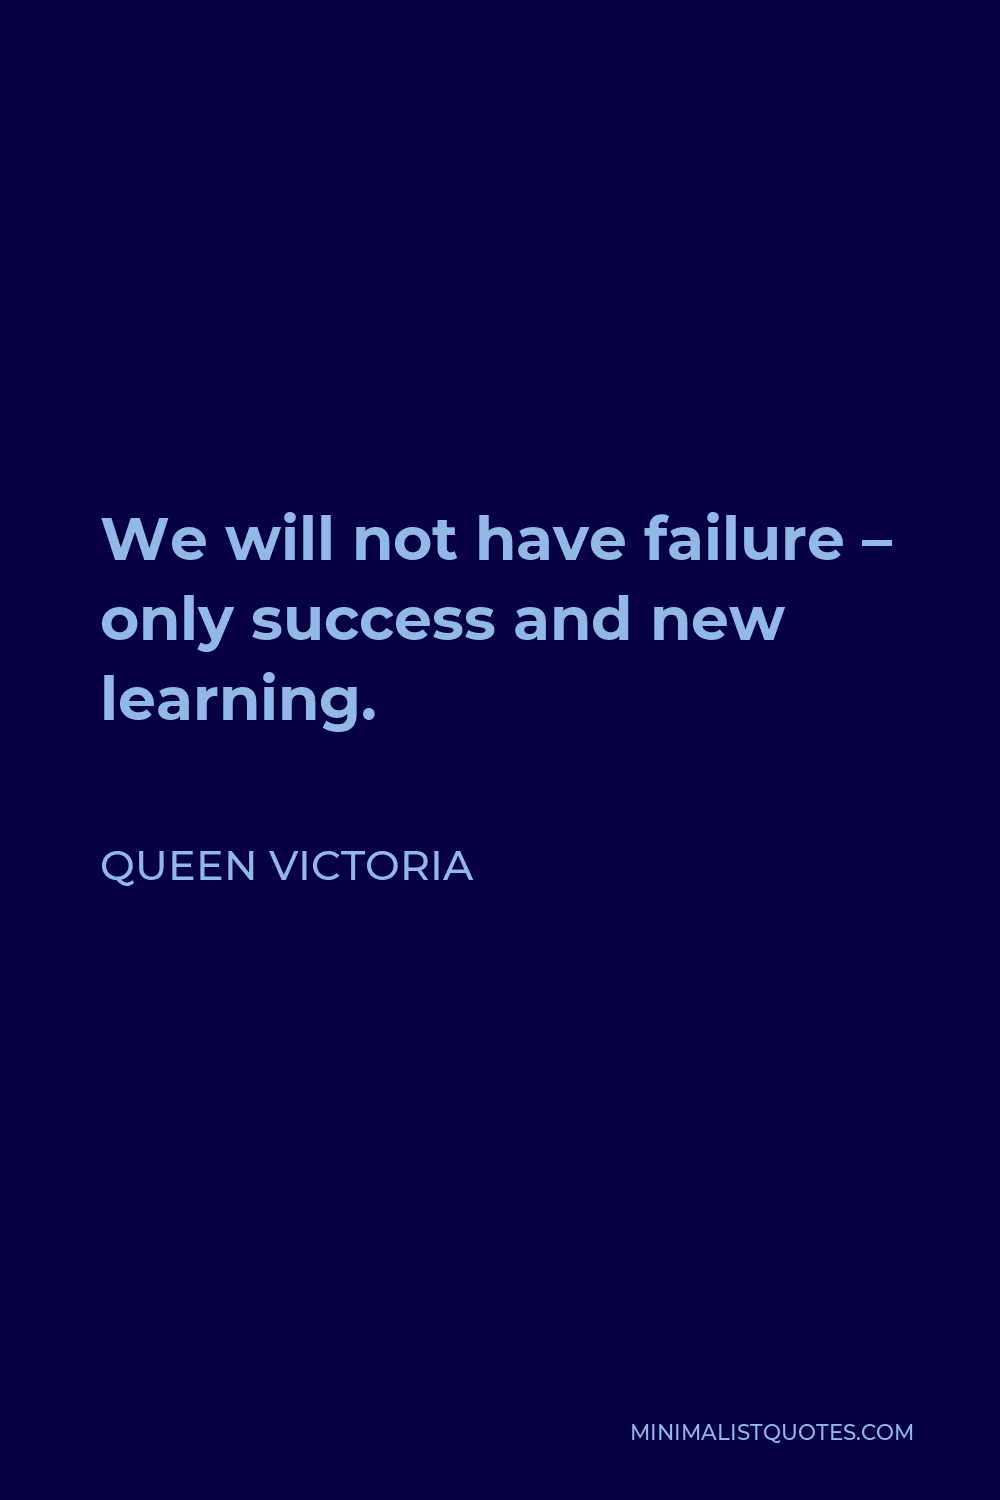 Queen Victoria Quote - We will not have failure – only success and new learning.